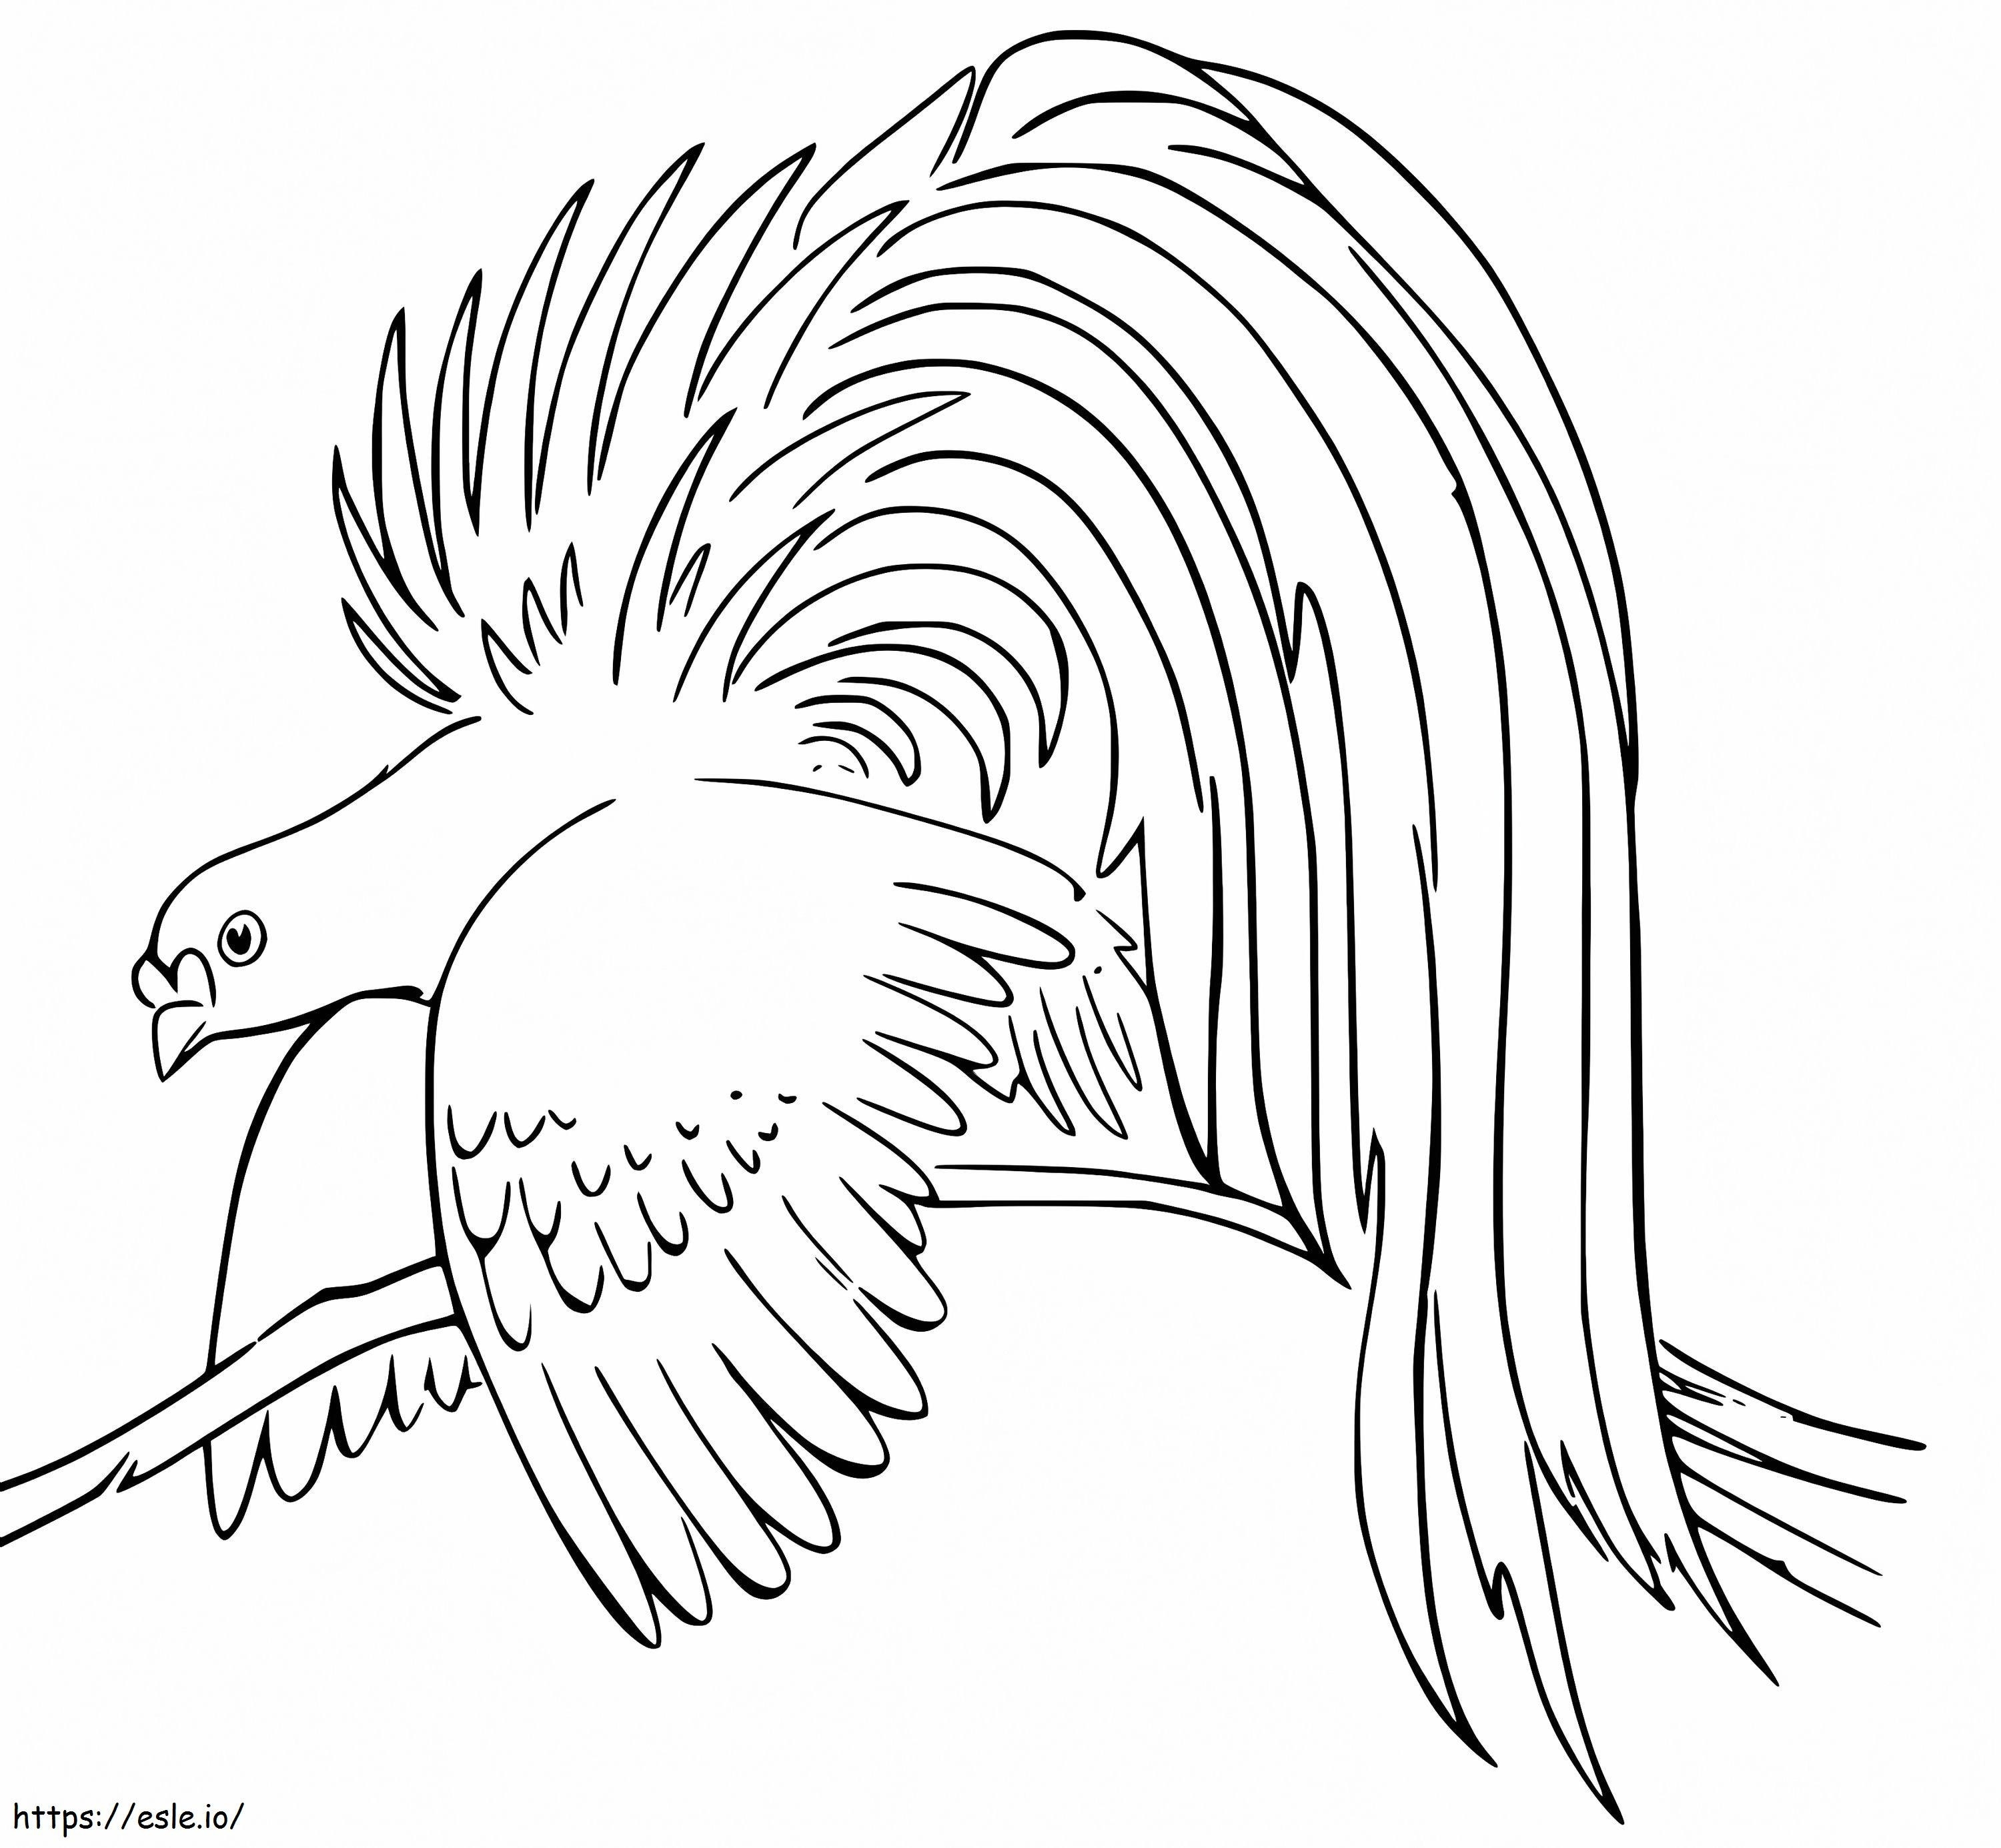 Lesser Bird Of Paradise coloring page